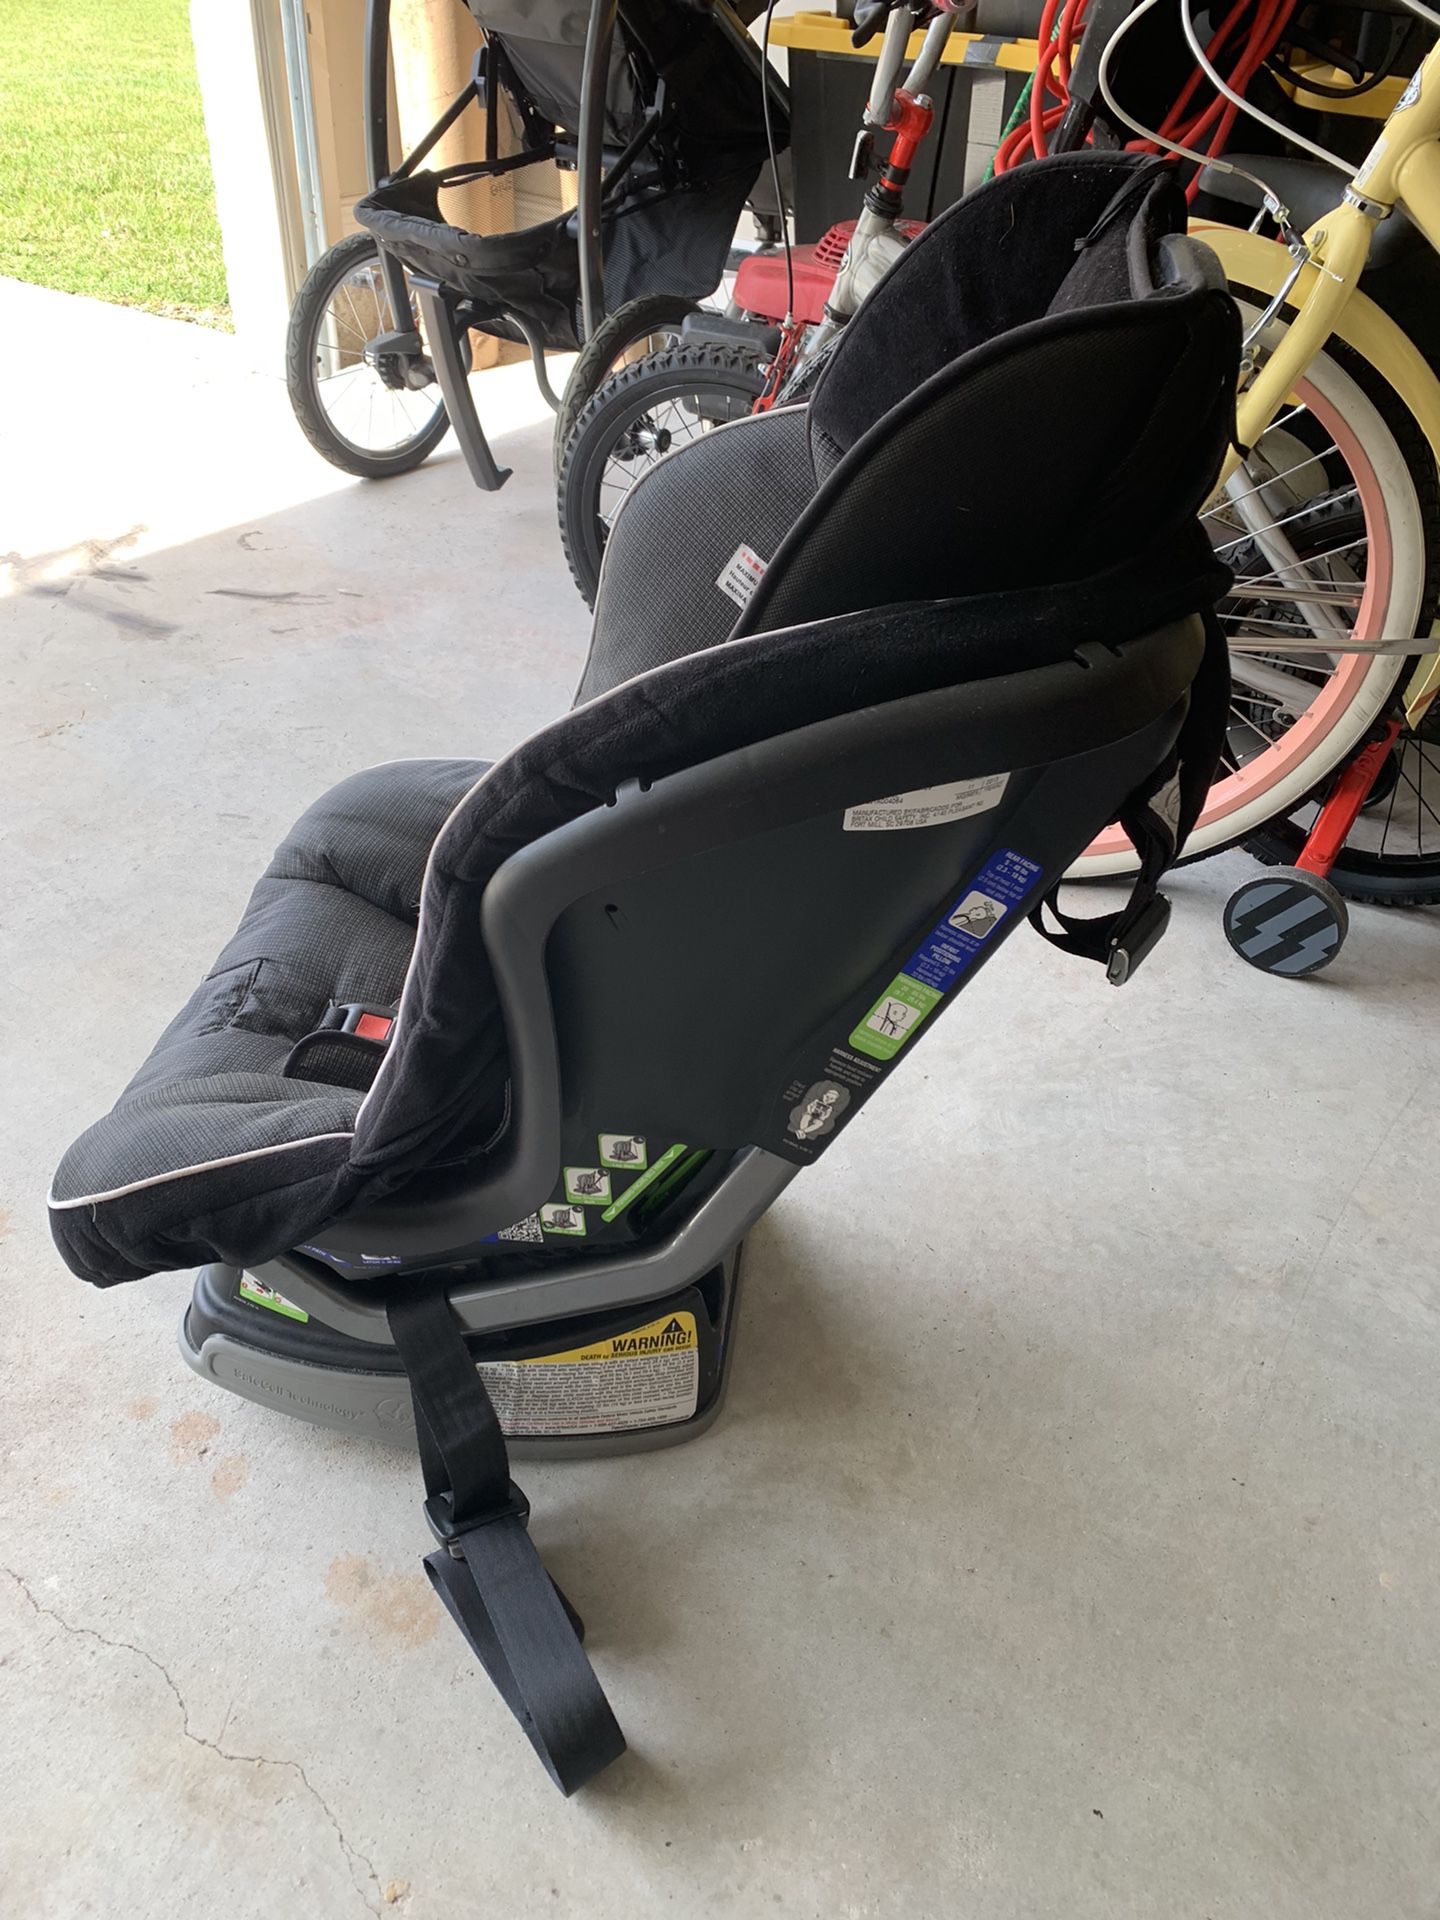 Car seat, only used at grandparents when visiting from out of state.